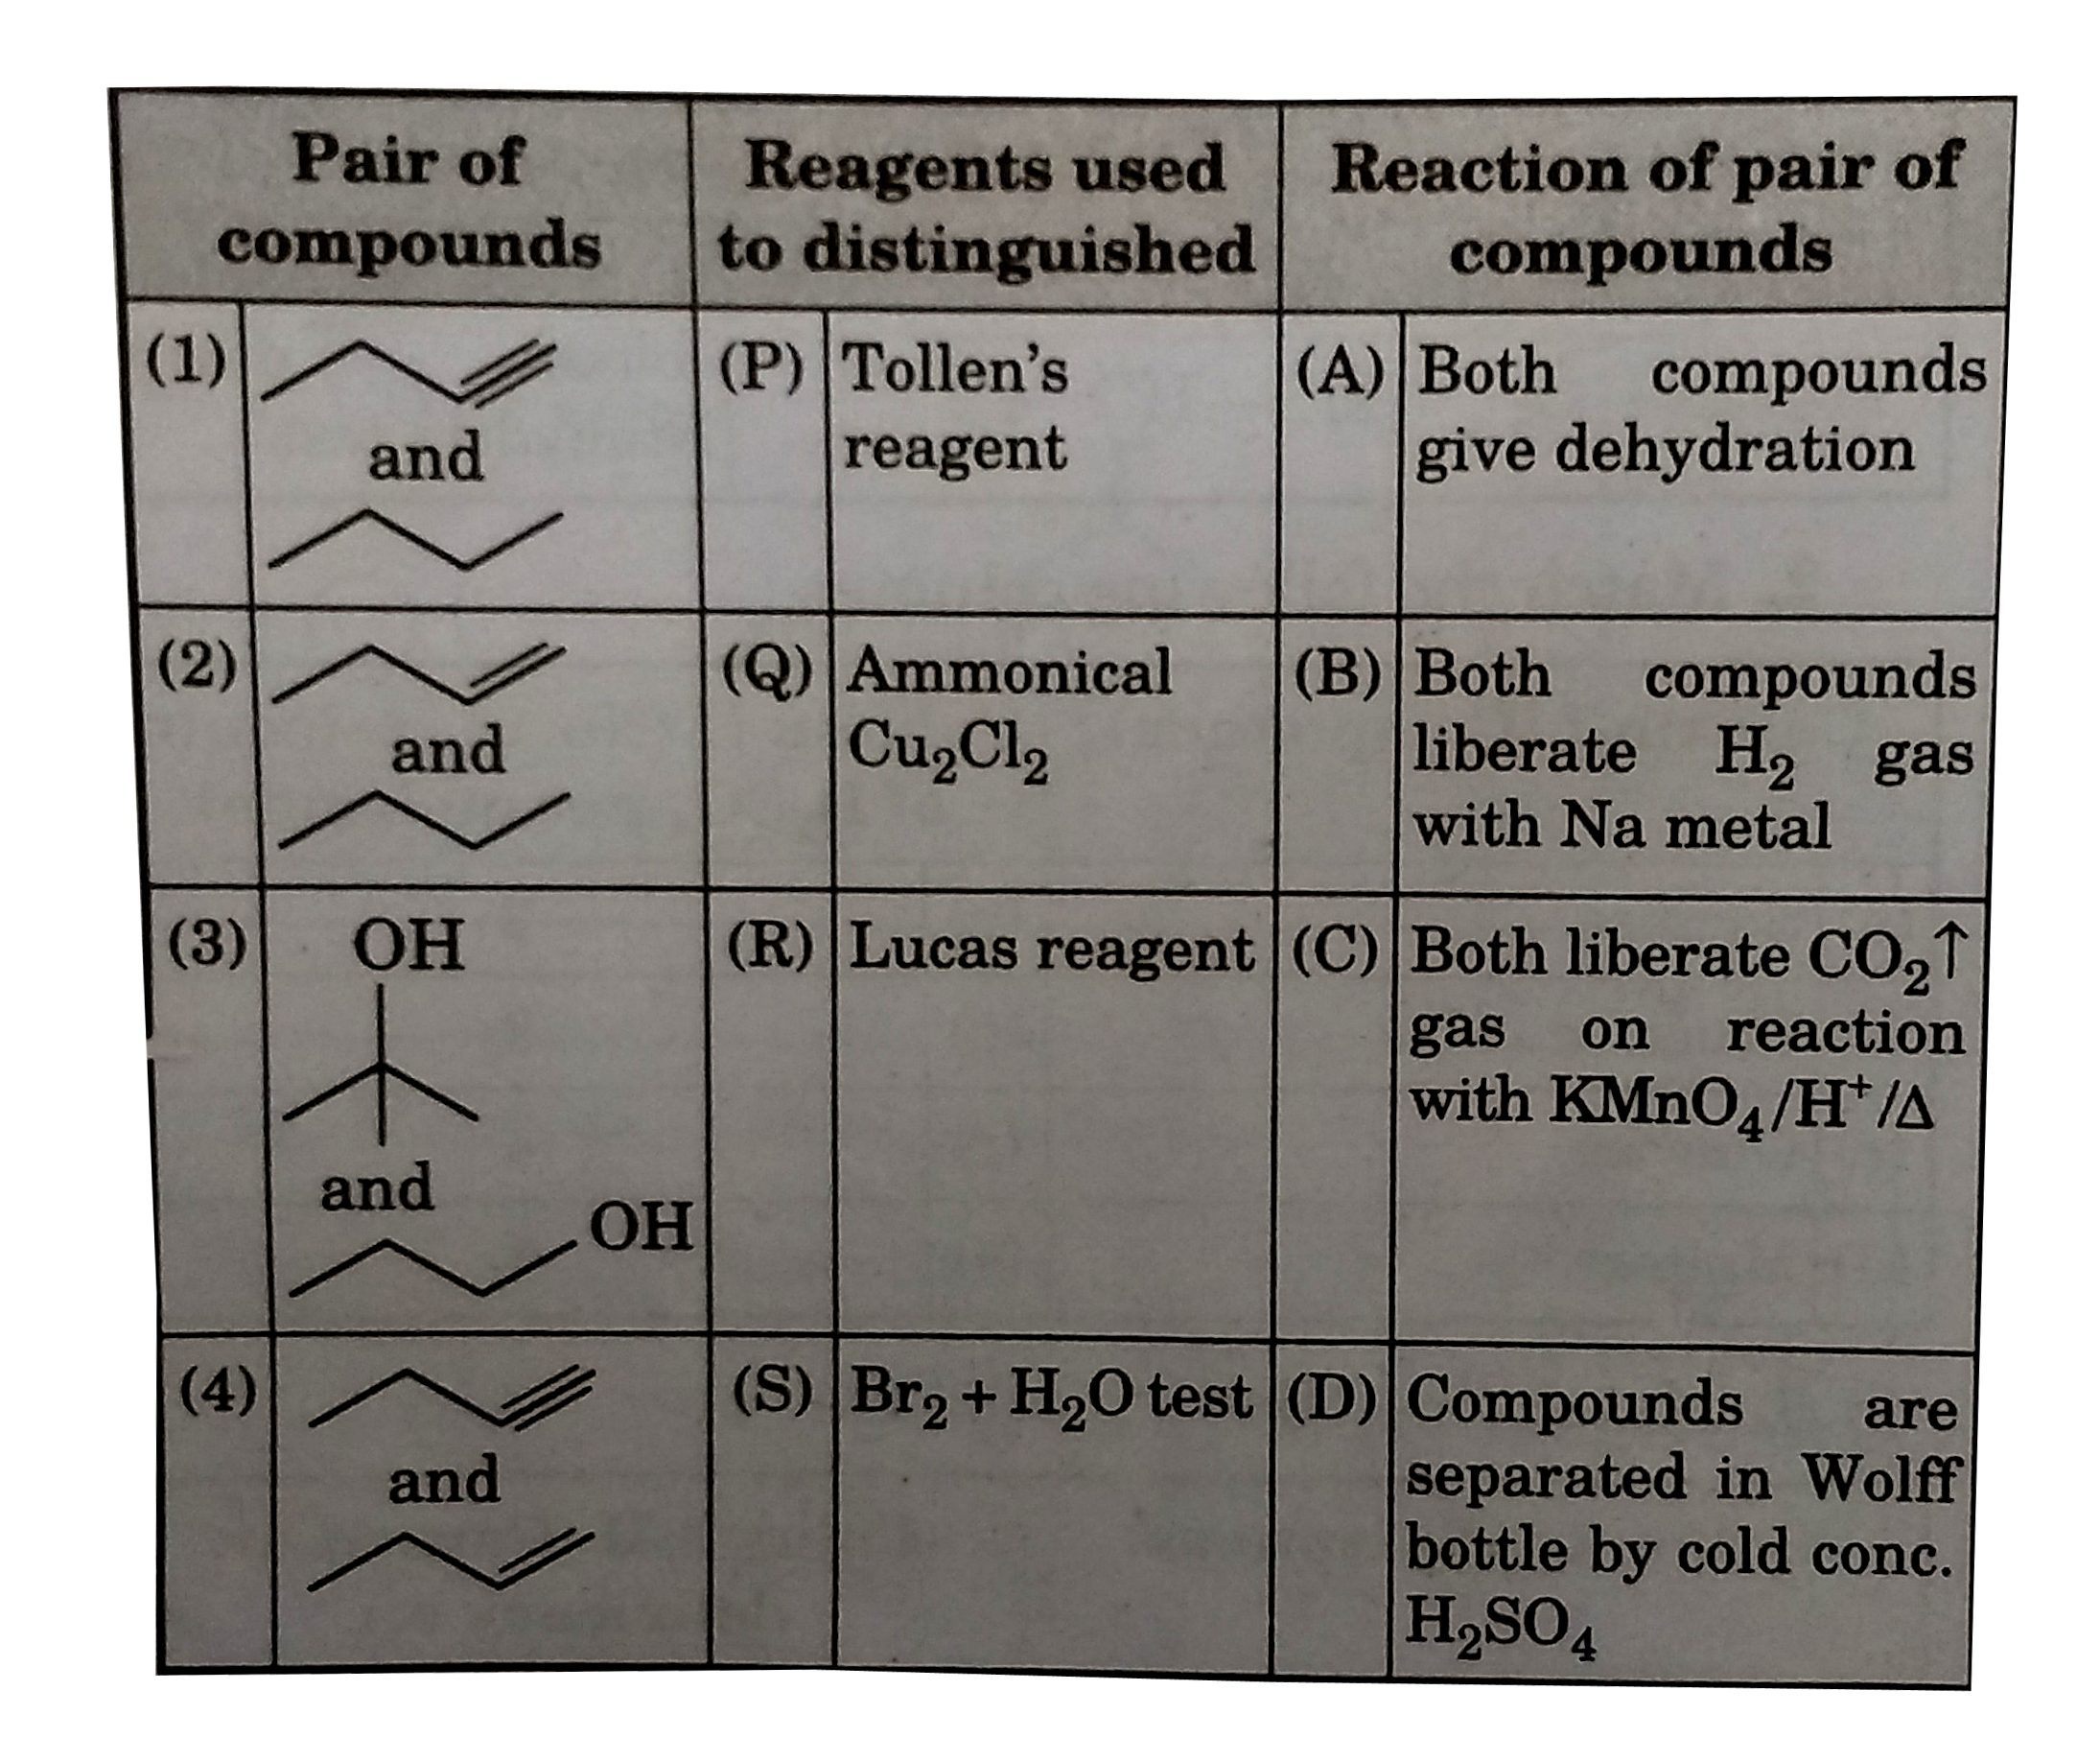 Identify correct set for 4nd pair of compounds ?